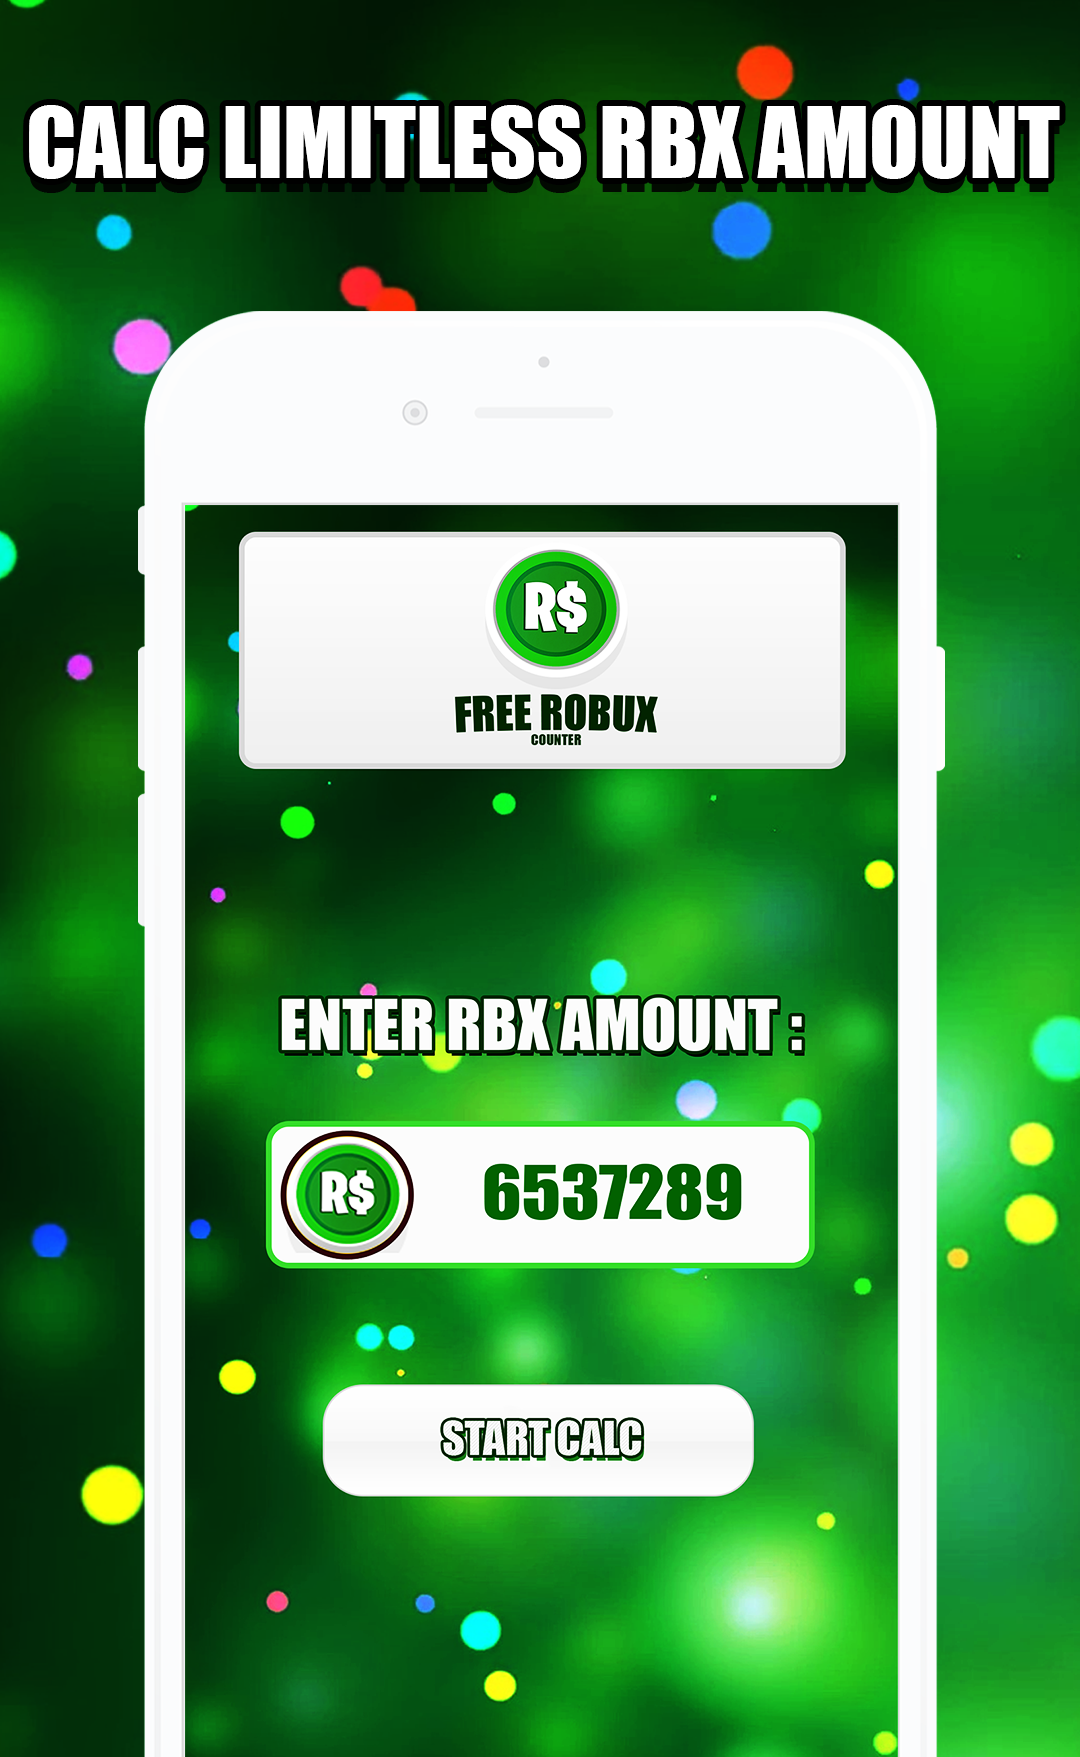 Free Robux Calc For Roblox’s - RBX 2020 게임 스크린 샷